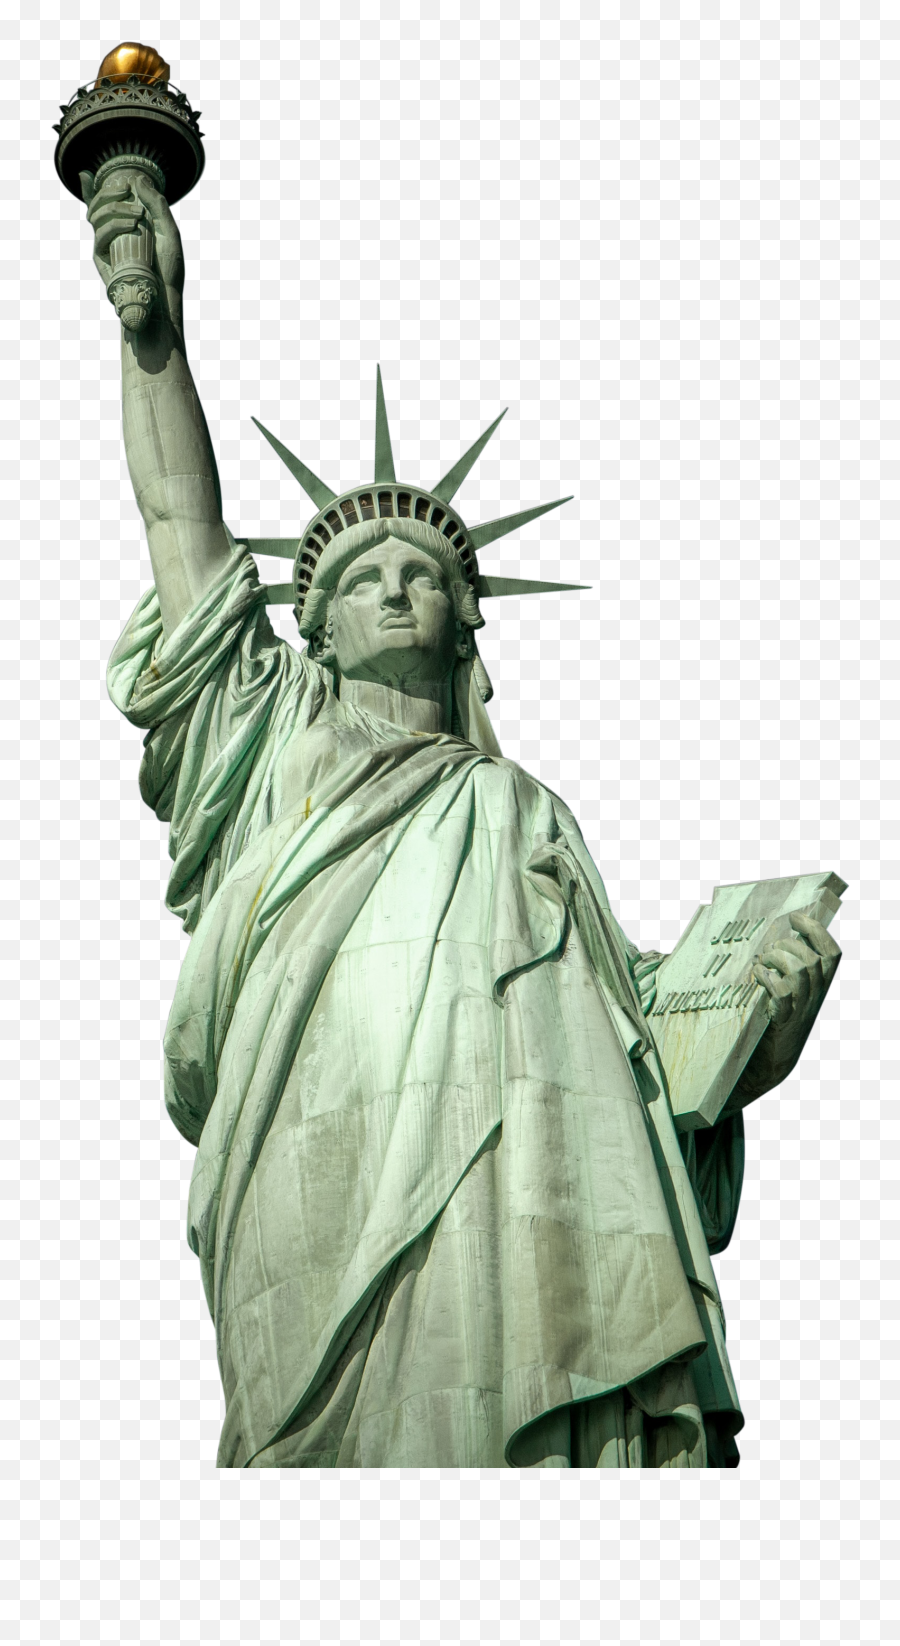 Free Transparent Png Images Icons And - Statue Of Liberty,Statue Of Liberty Transparent Background